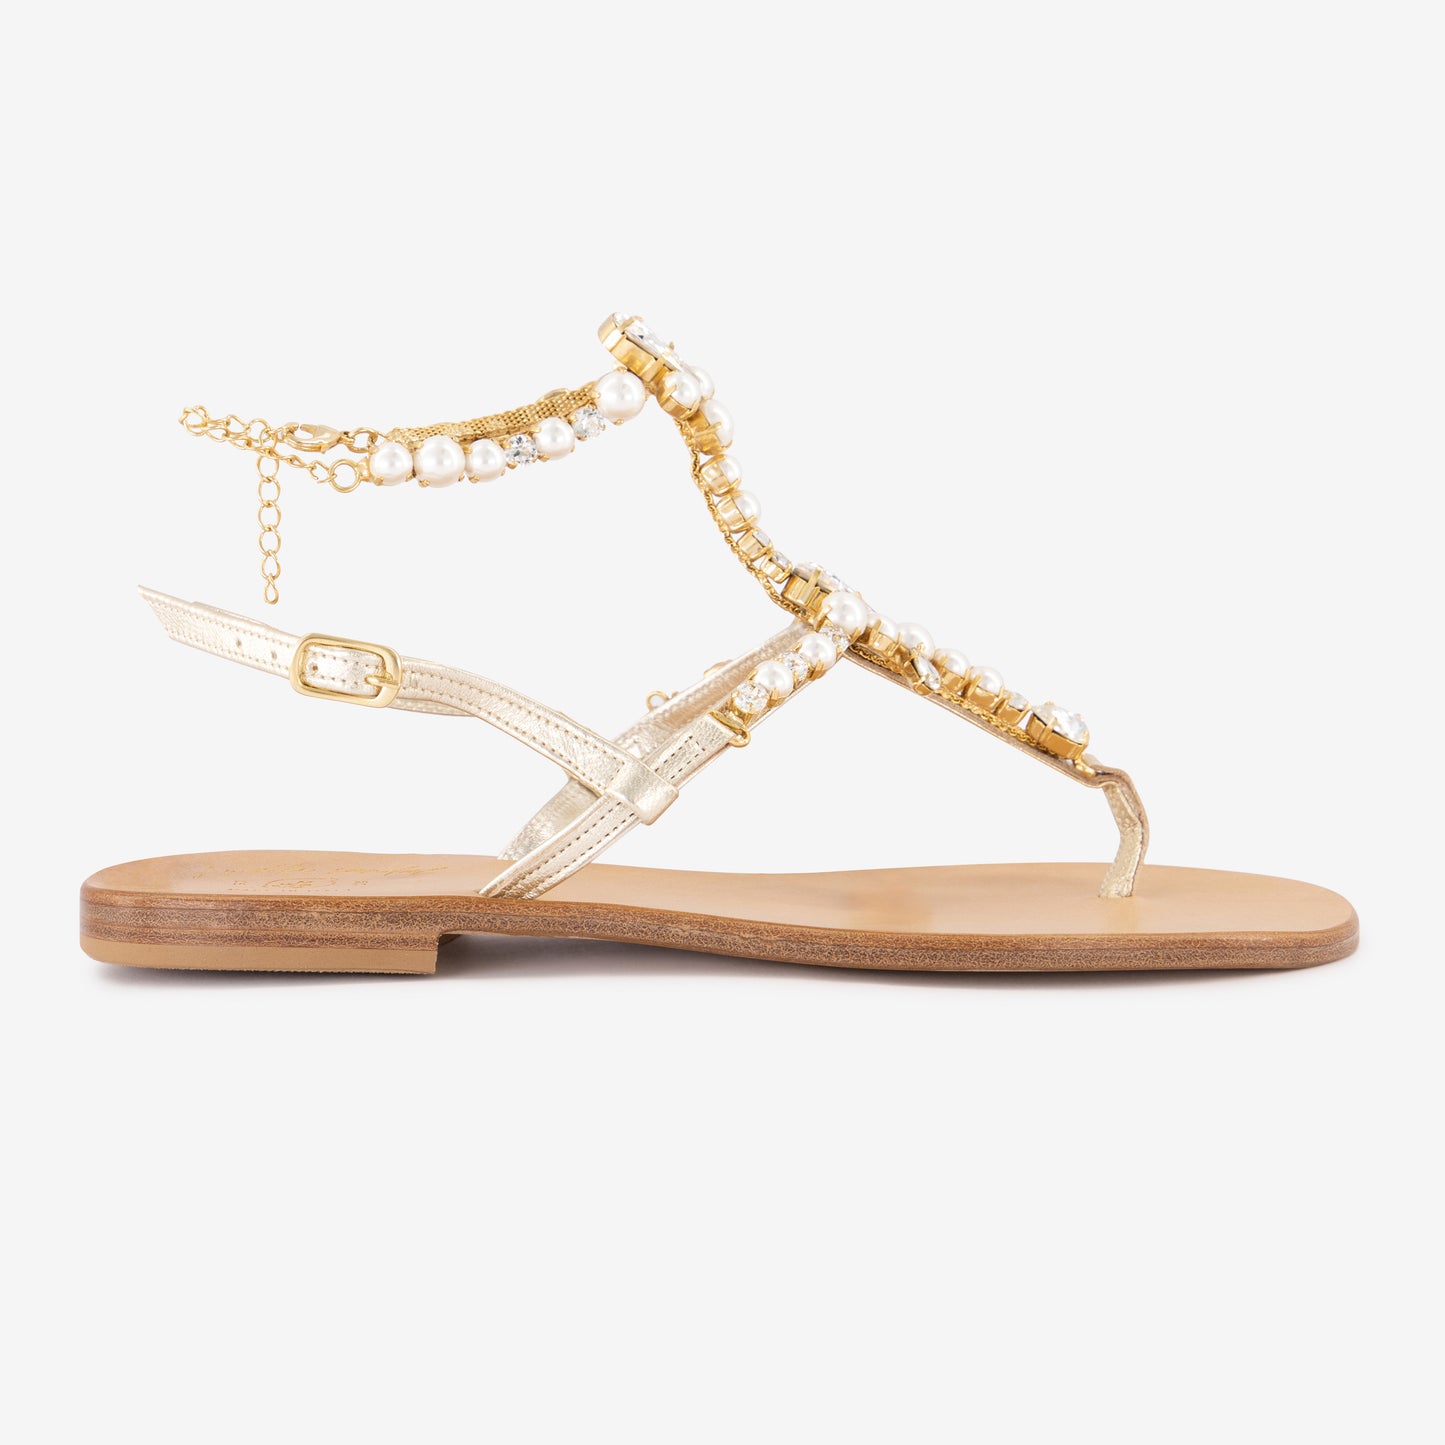 Amalafi Sandal "Perla" | Color White & Gold| Italian Leather Sandal | Handmade in Italy| The breathable insole, made of real leather, ensures maximum comfort for your feet, while the hand-stitched Italian leather uppers of first choice provide strength and durability. The pearls on the upper sole are carefully placed by expert craftsmen, adding a touch of elegance to the sandal.